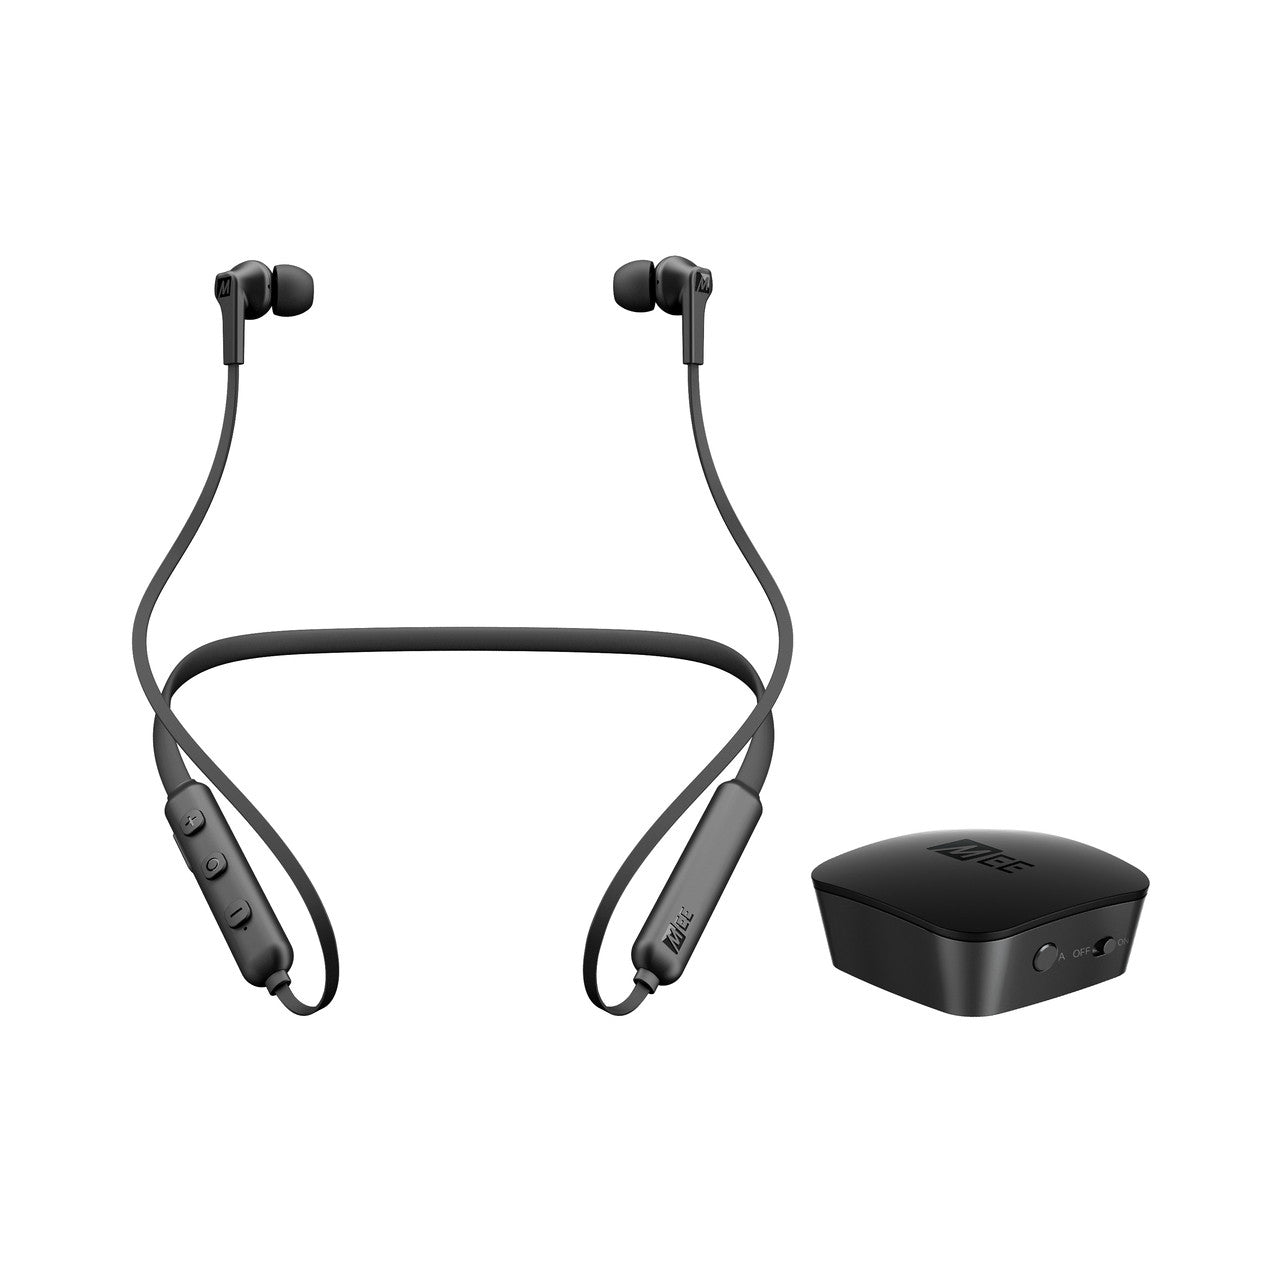 Image of Connect T1N1 Wireless Headphone System for TV - Includes Bluetooth Transmitter and Neckband Headphones.